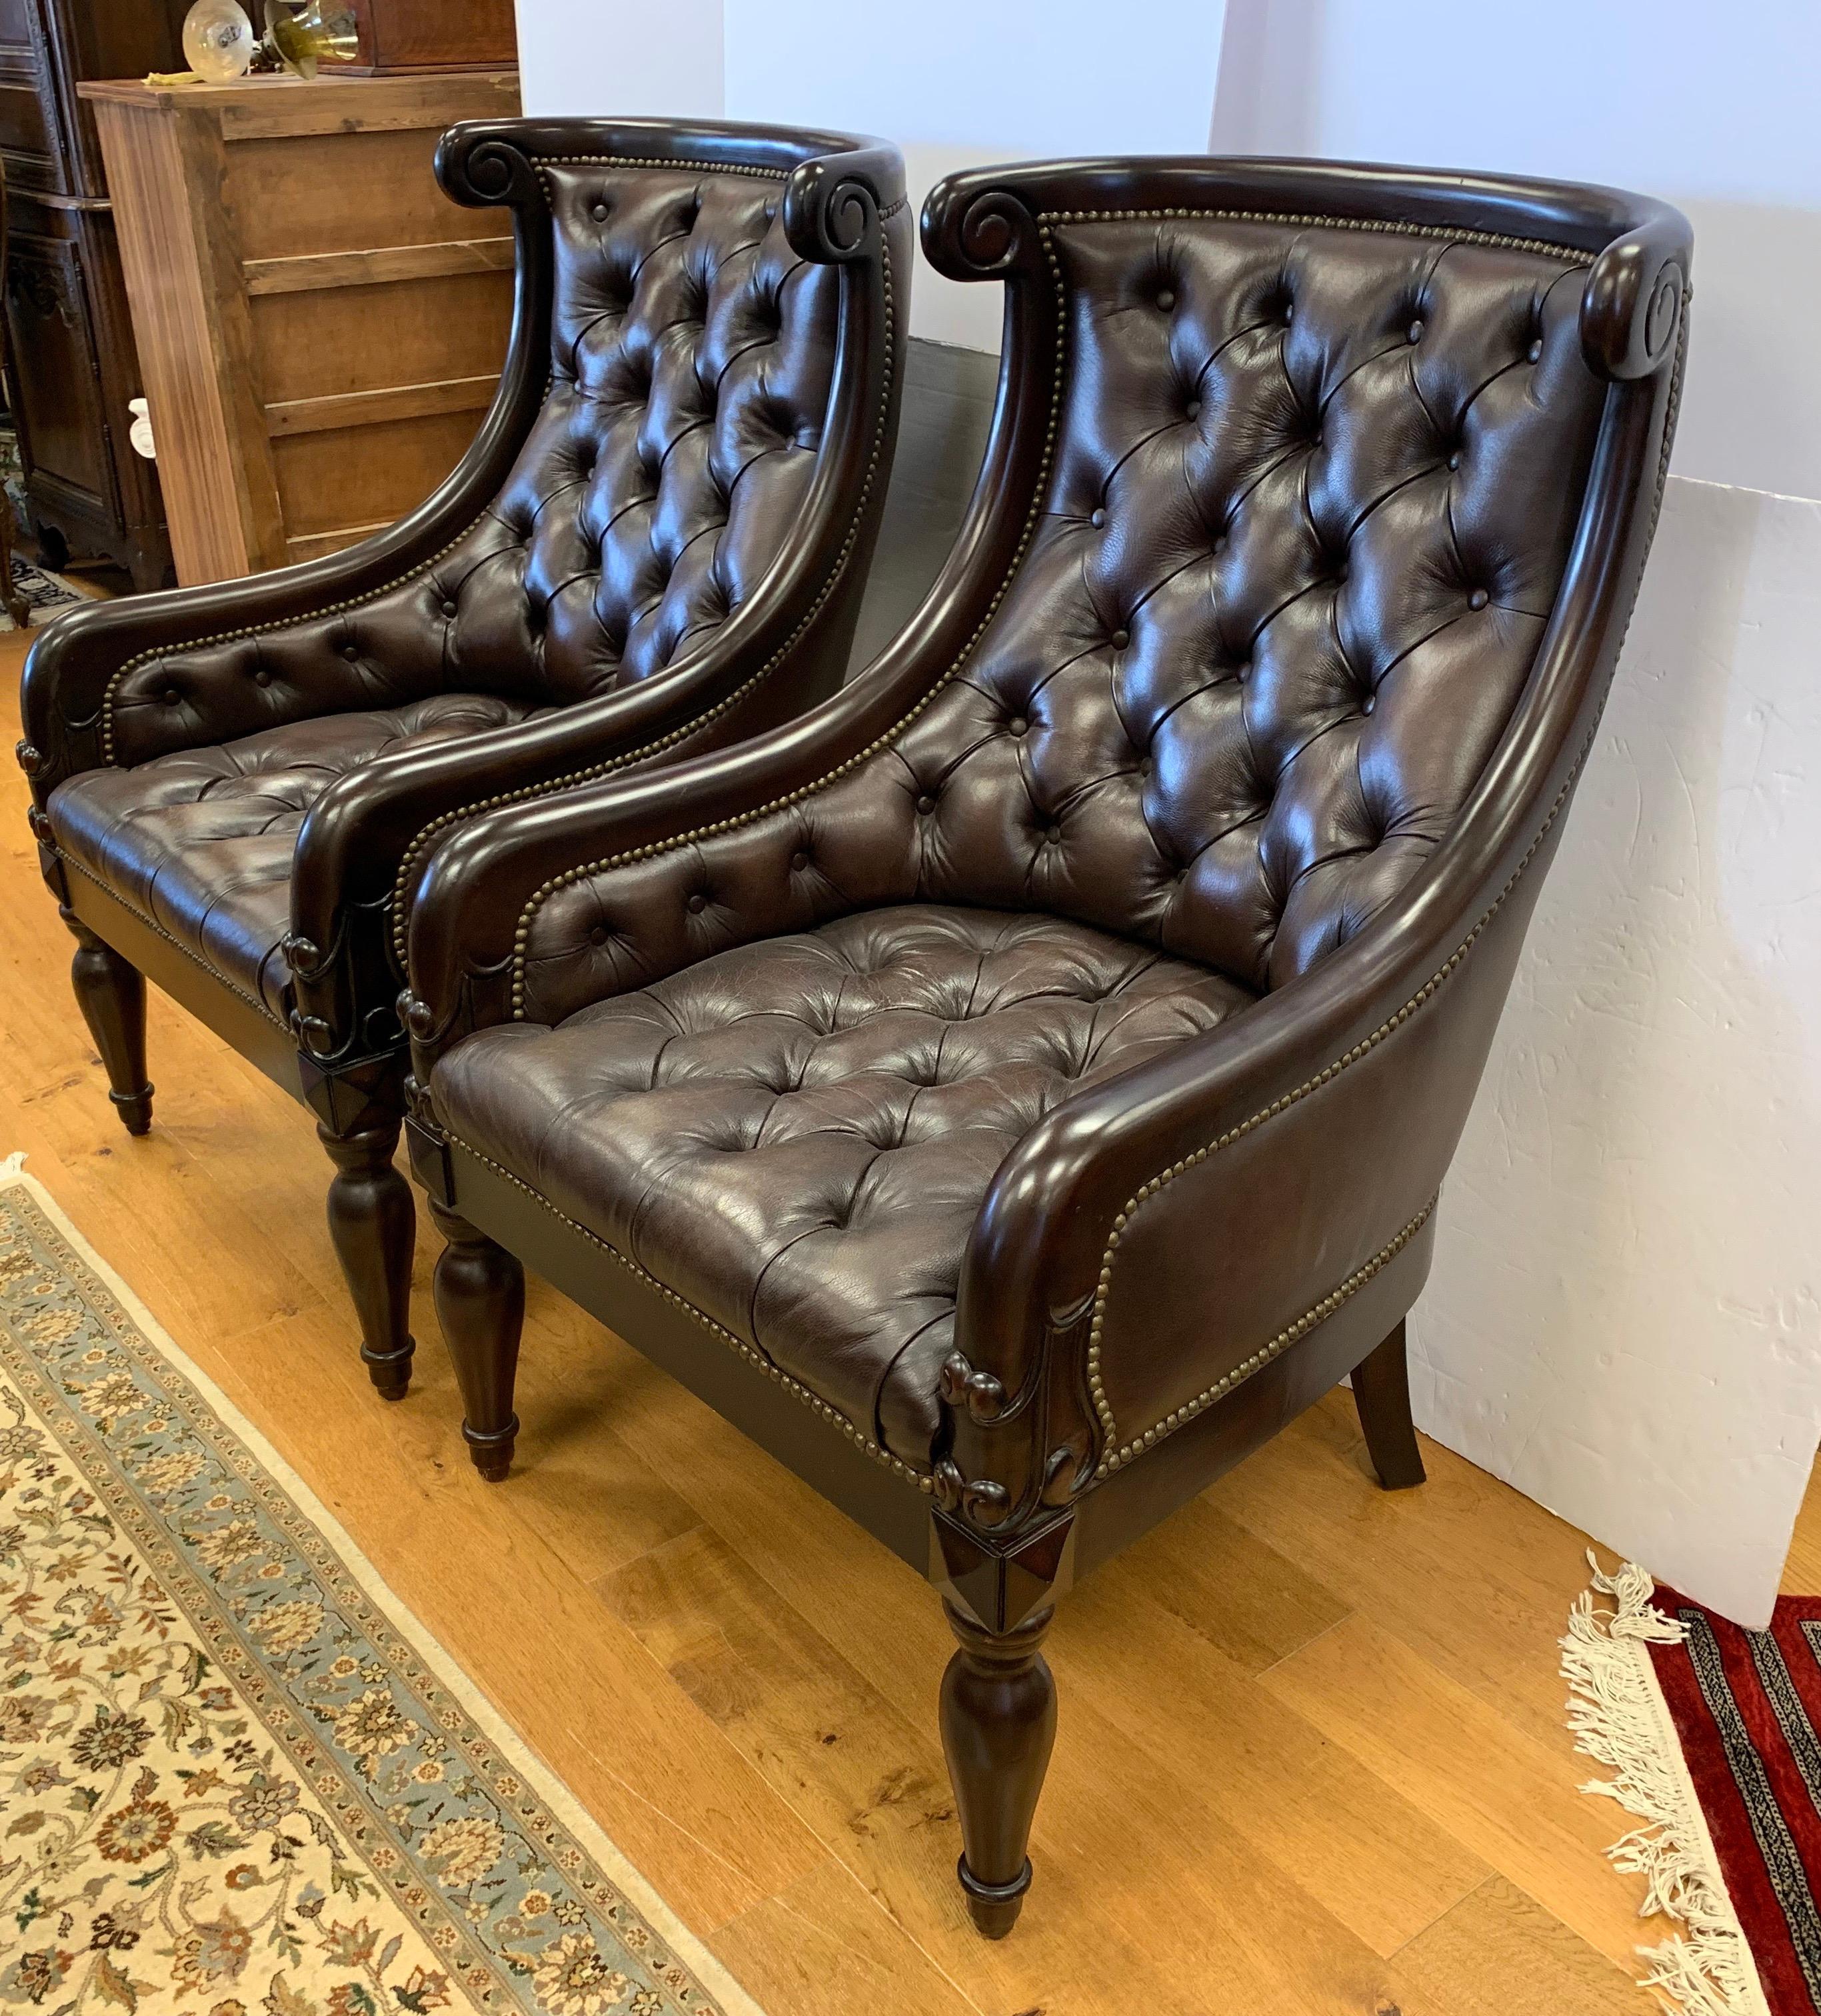 Stunning pair of matching dark brown leather tufted Chesterfield armchairs with mahogany wood.
These are big masculine chairs; please see dimensions below. They are spectacular.